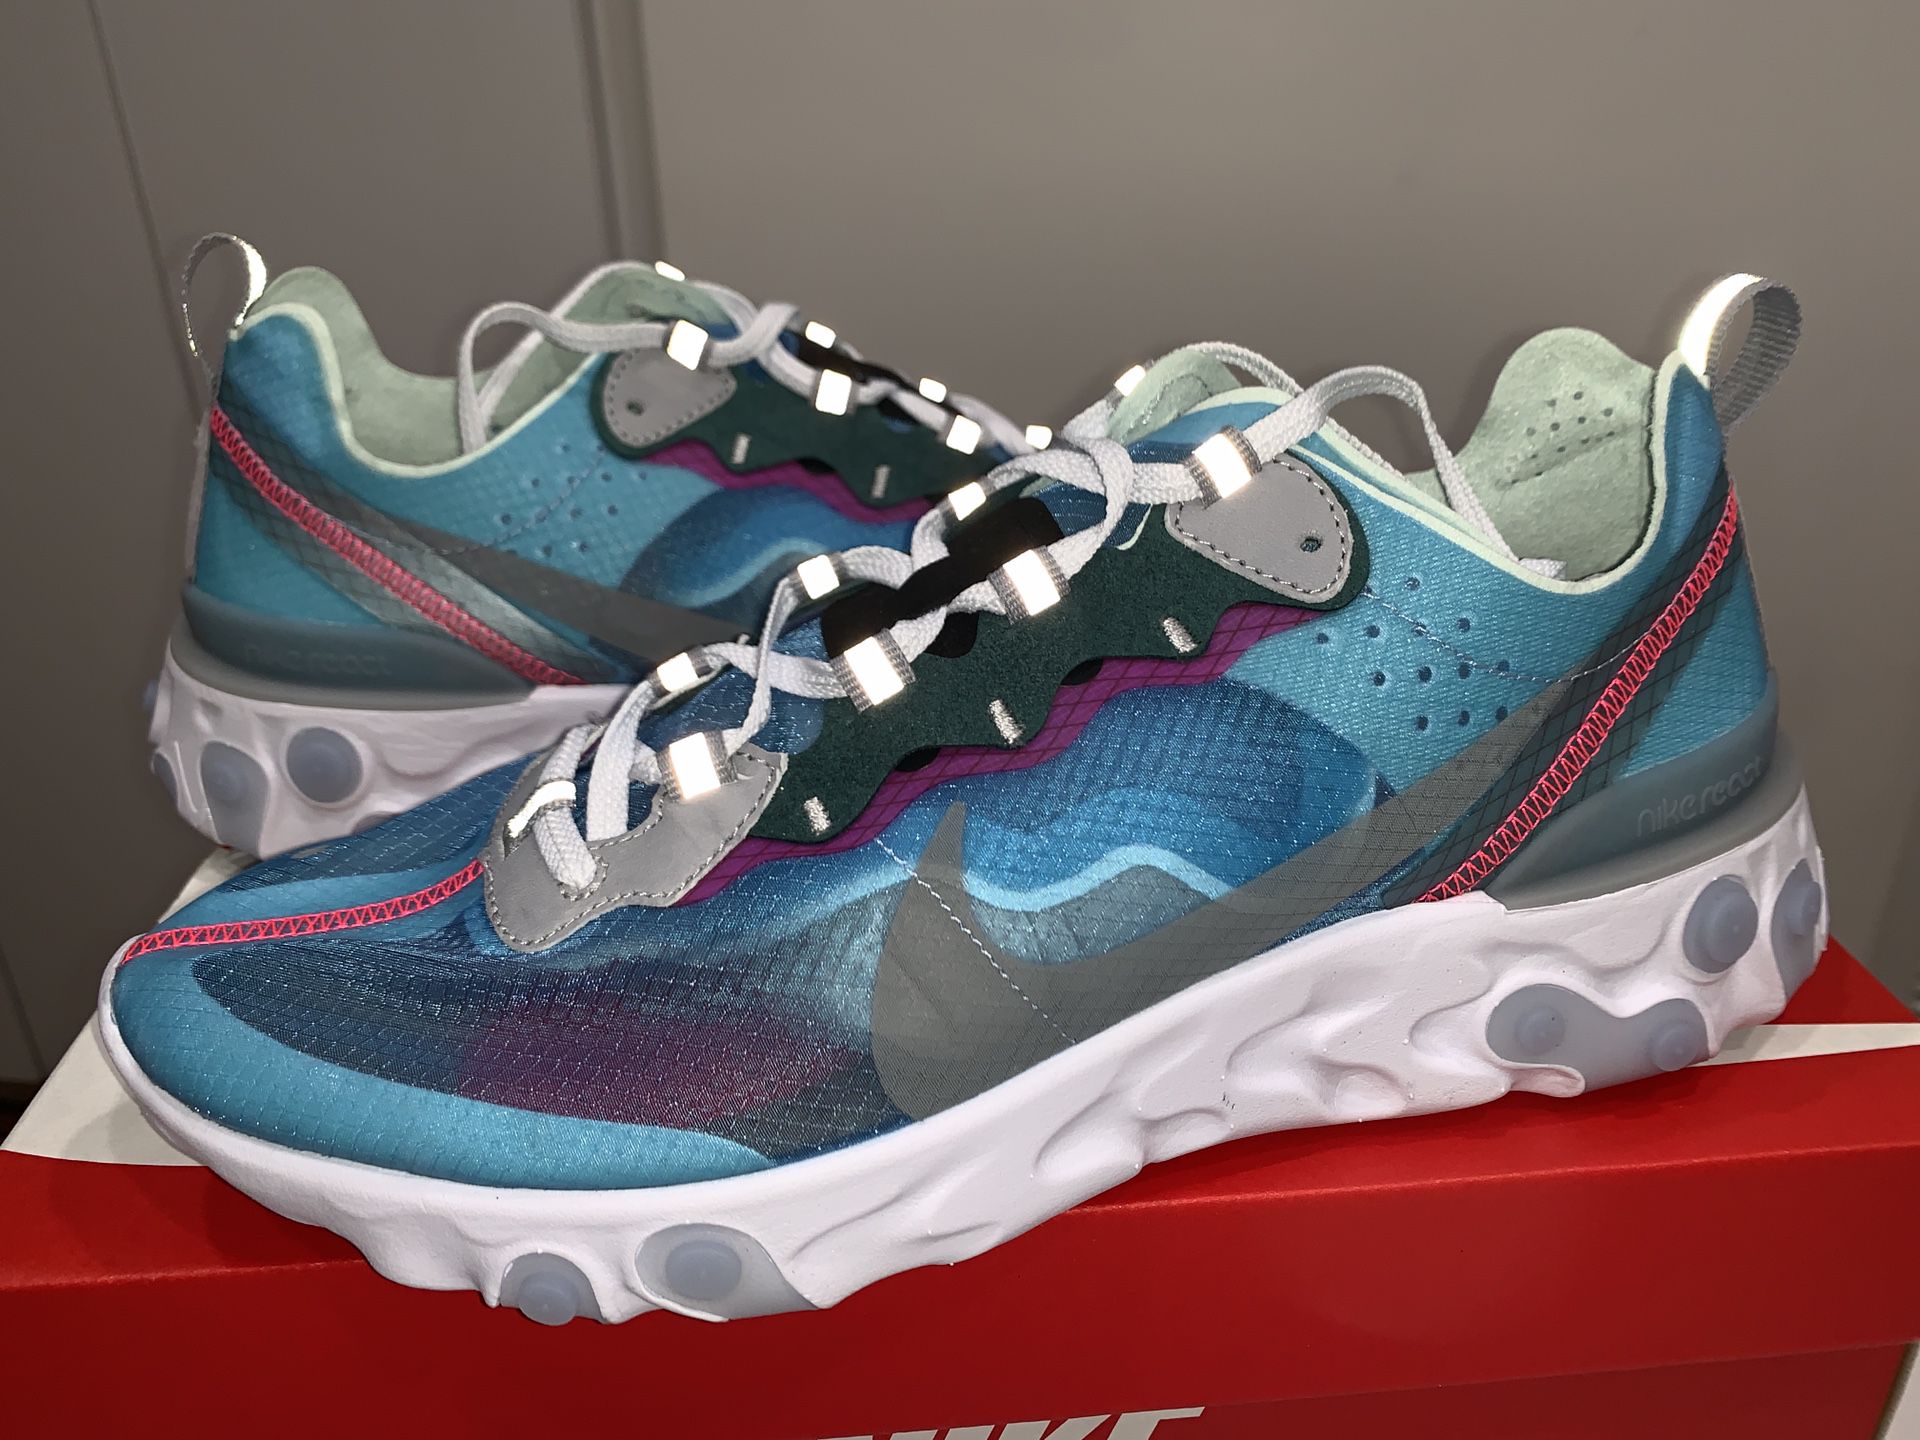 Nike React Element 87 Royal Tint South Size 10 for Sale in Miami, FL - OfferUp